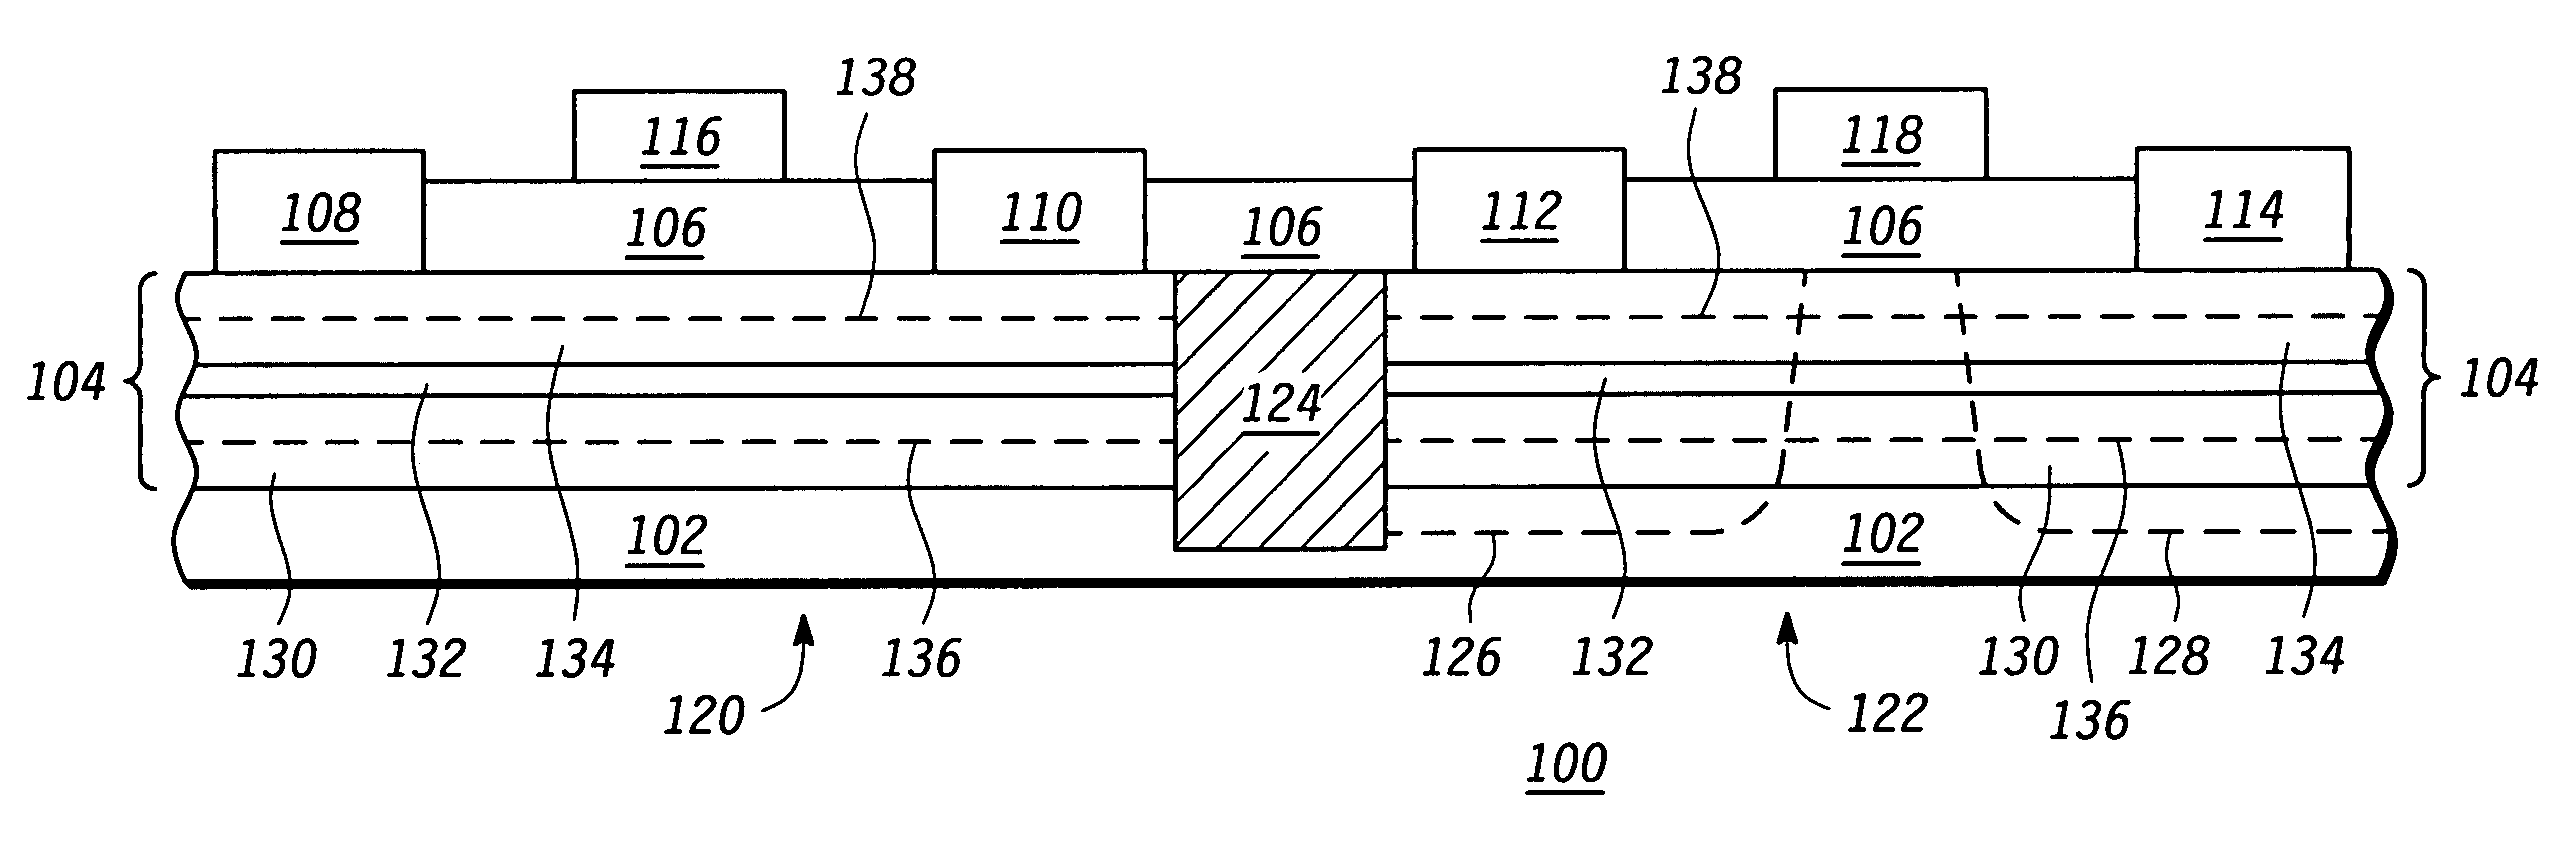 Complementary metal-oxide-semiconductor field effect transistor structure having ion implant in only one of the complementary devices